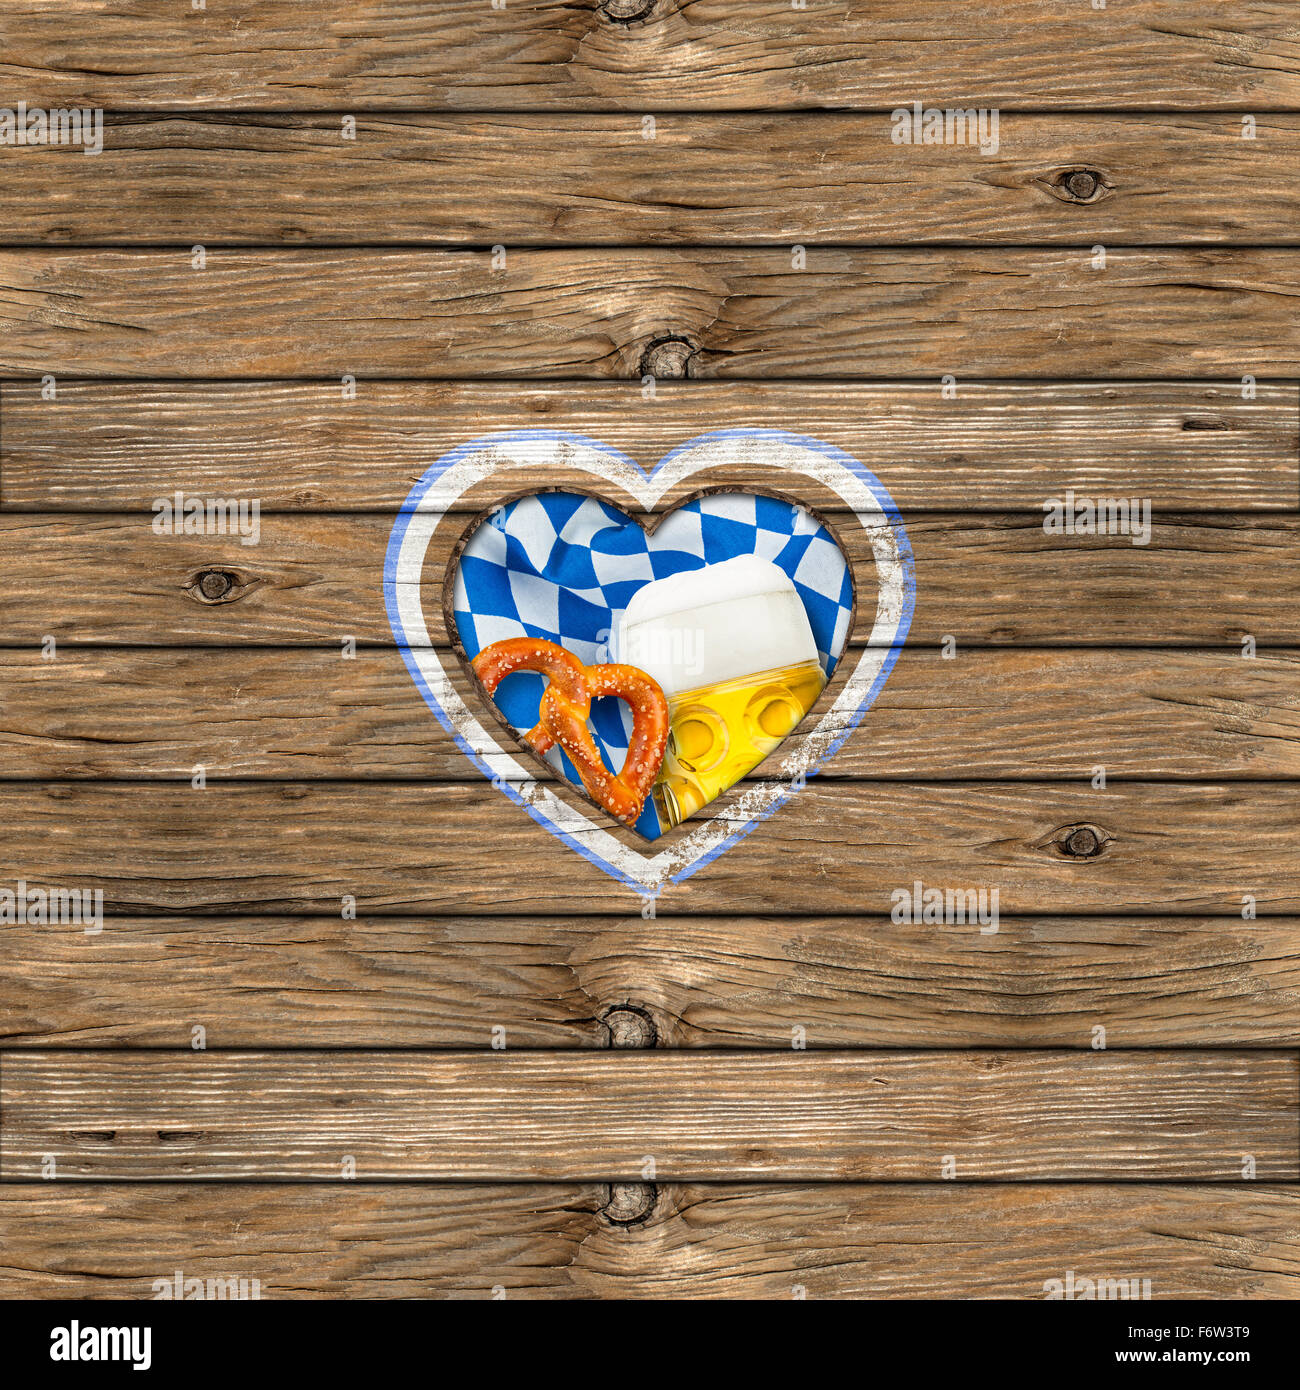 wooden board with heart-shaped cut out beer mug pretzel and bavarian flag Stock Photo